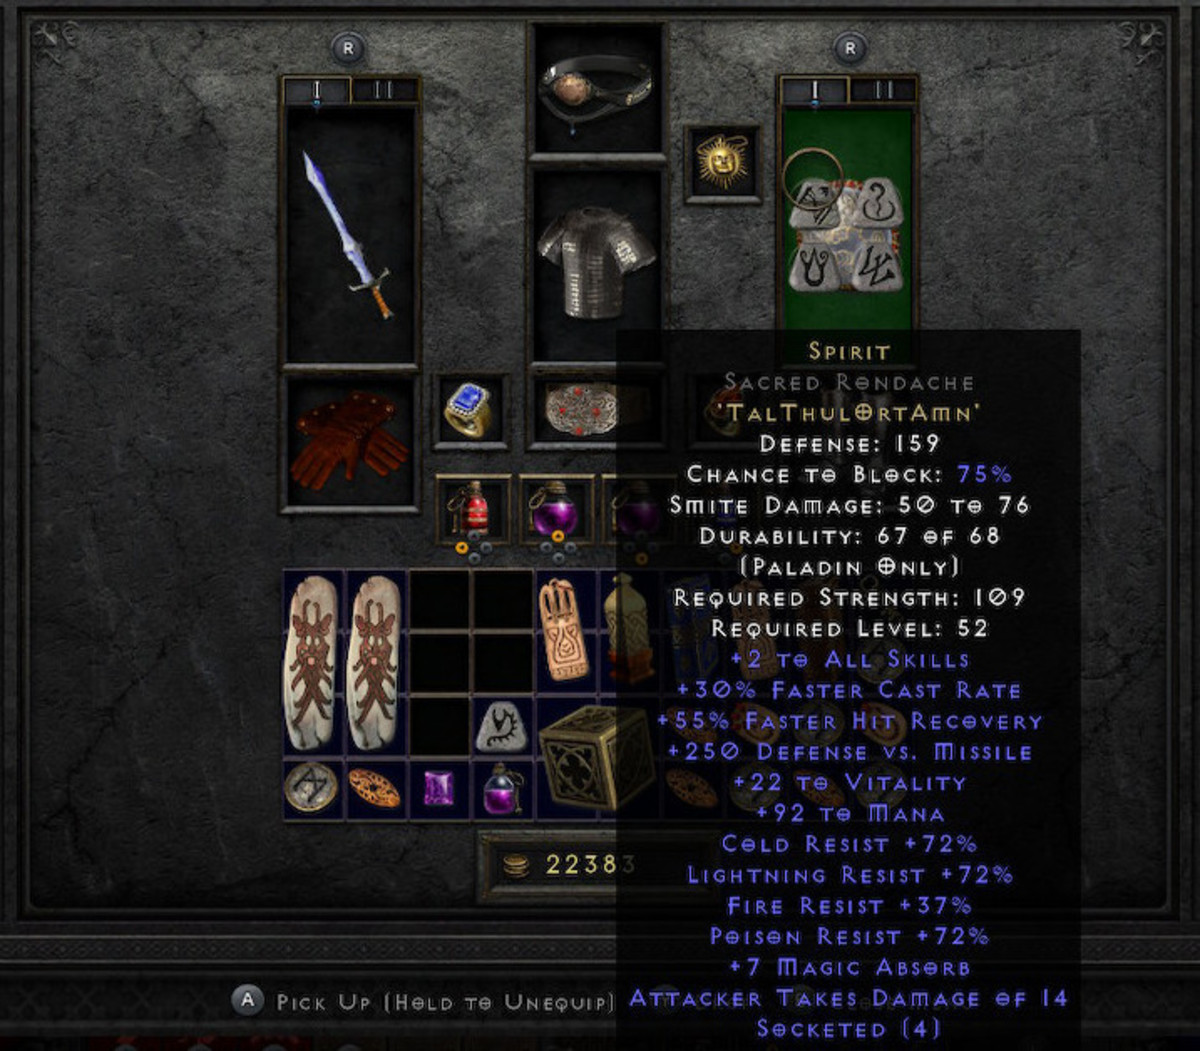 This item can offer a moderate boost to all resistances.